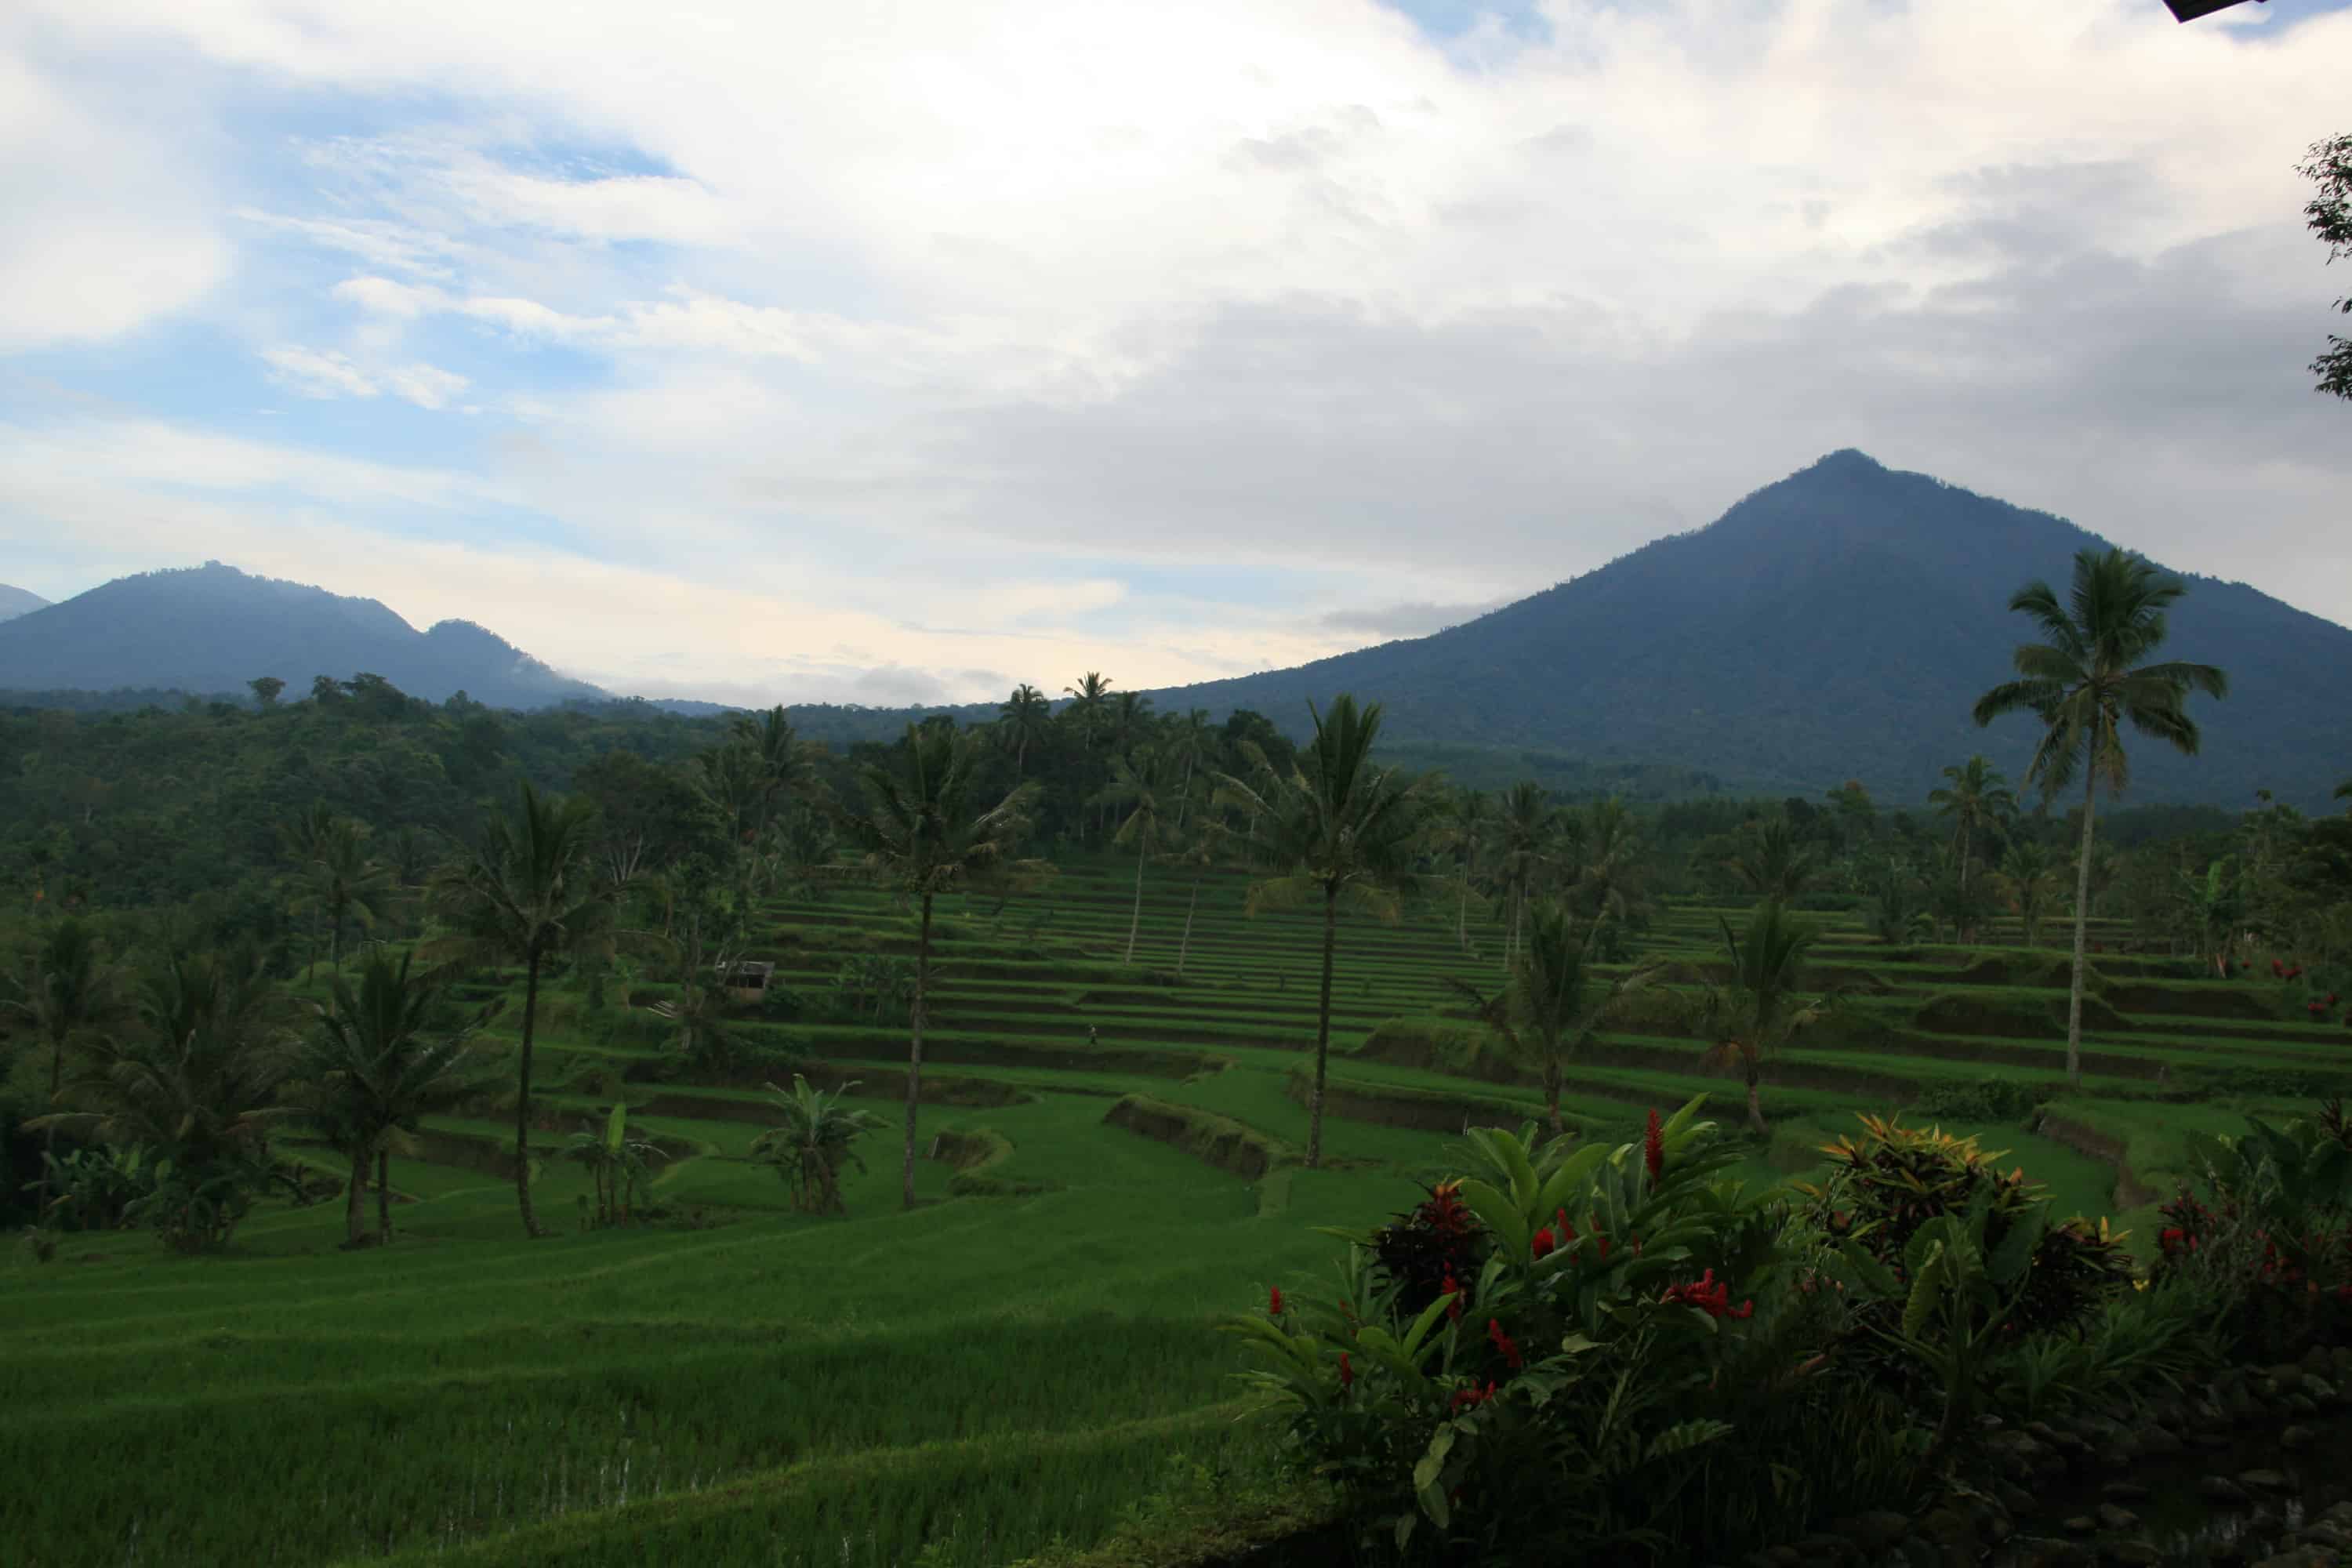 rice paddy fields in Indonesia with mountains in the background views from Iljen resort